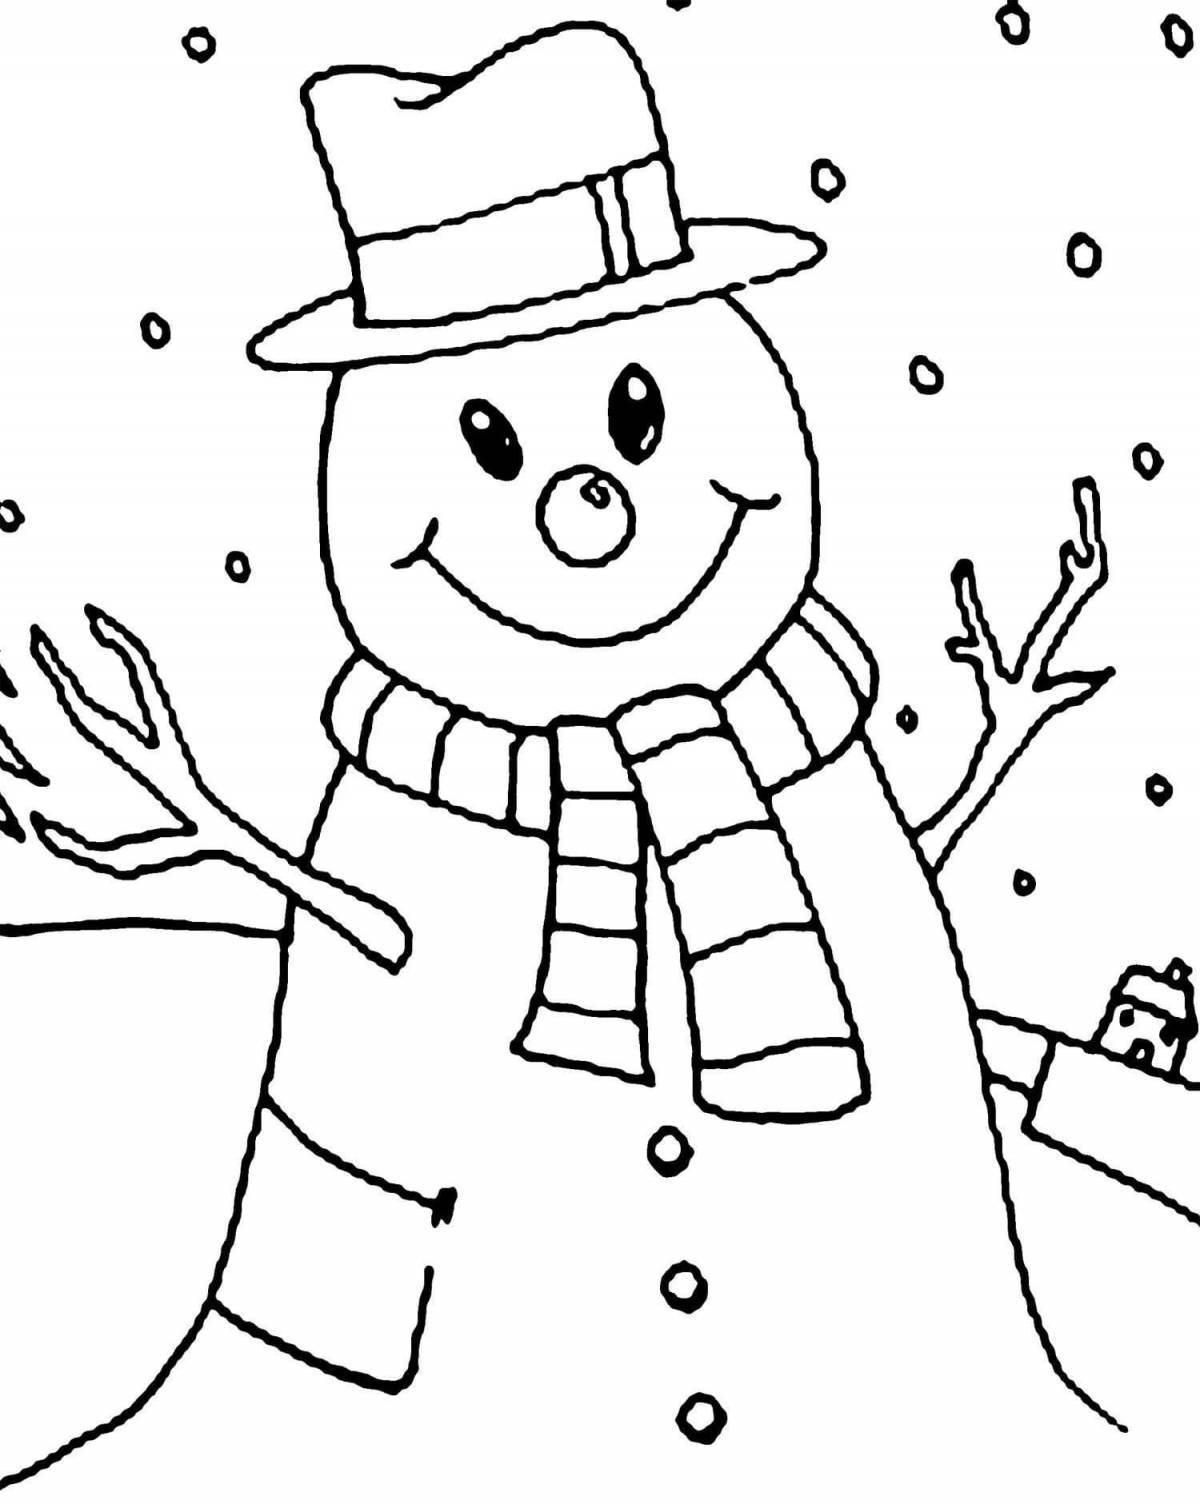 Funny snowman coloring book for kids